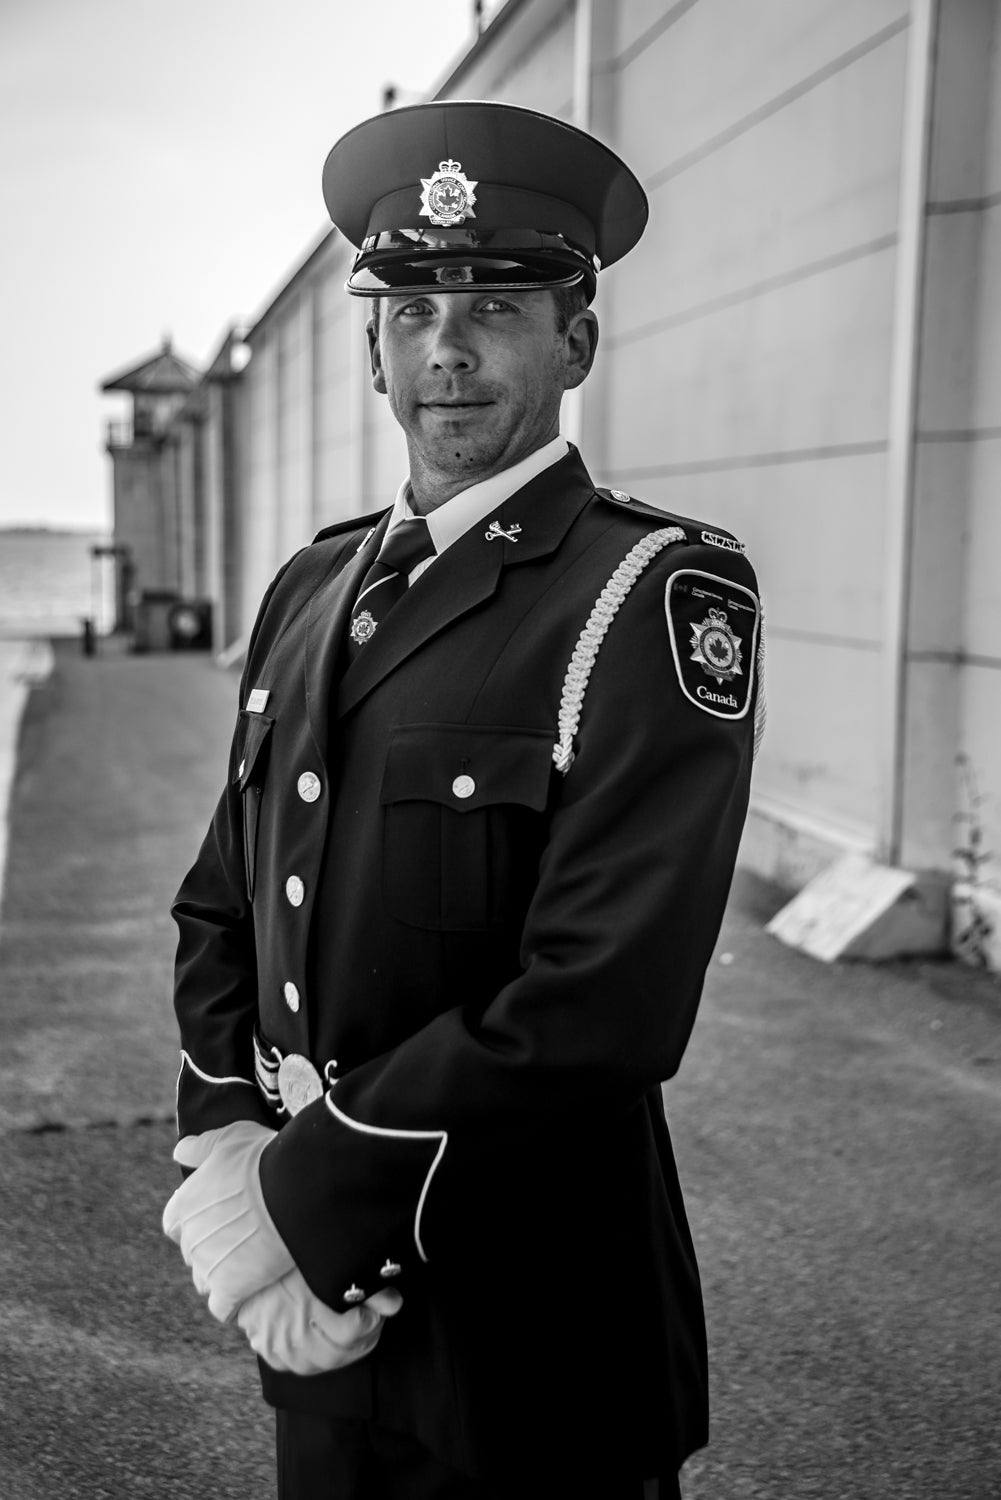 Correctional Officer in parade dress uniform